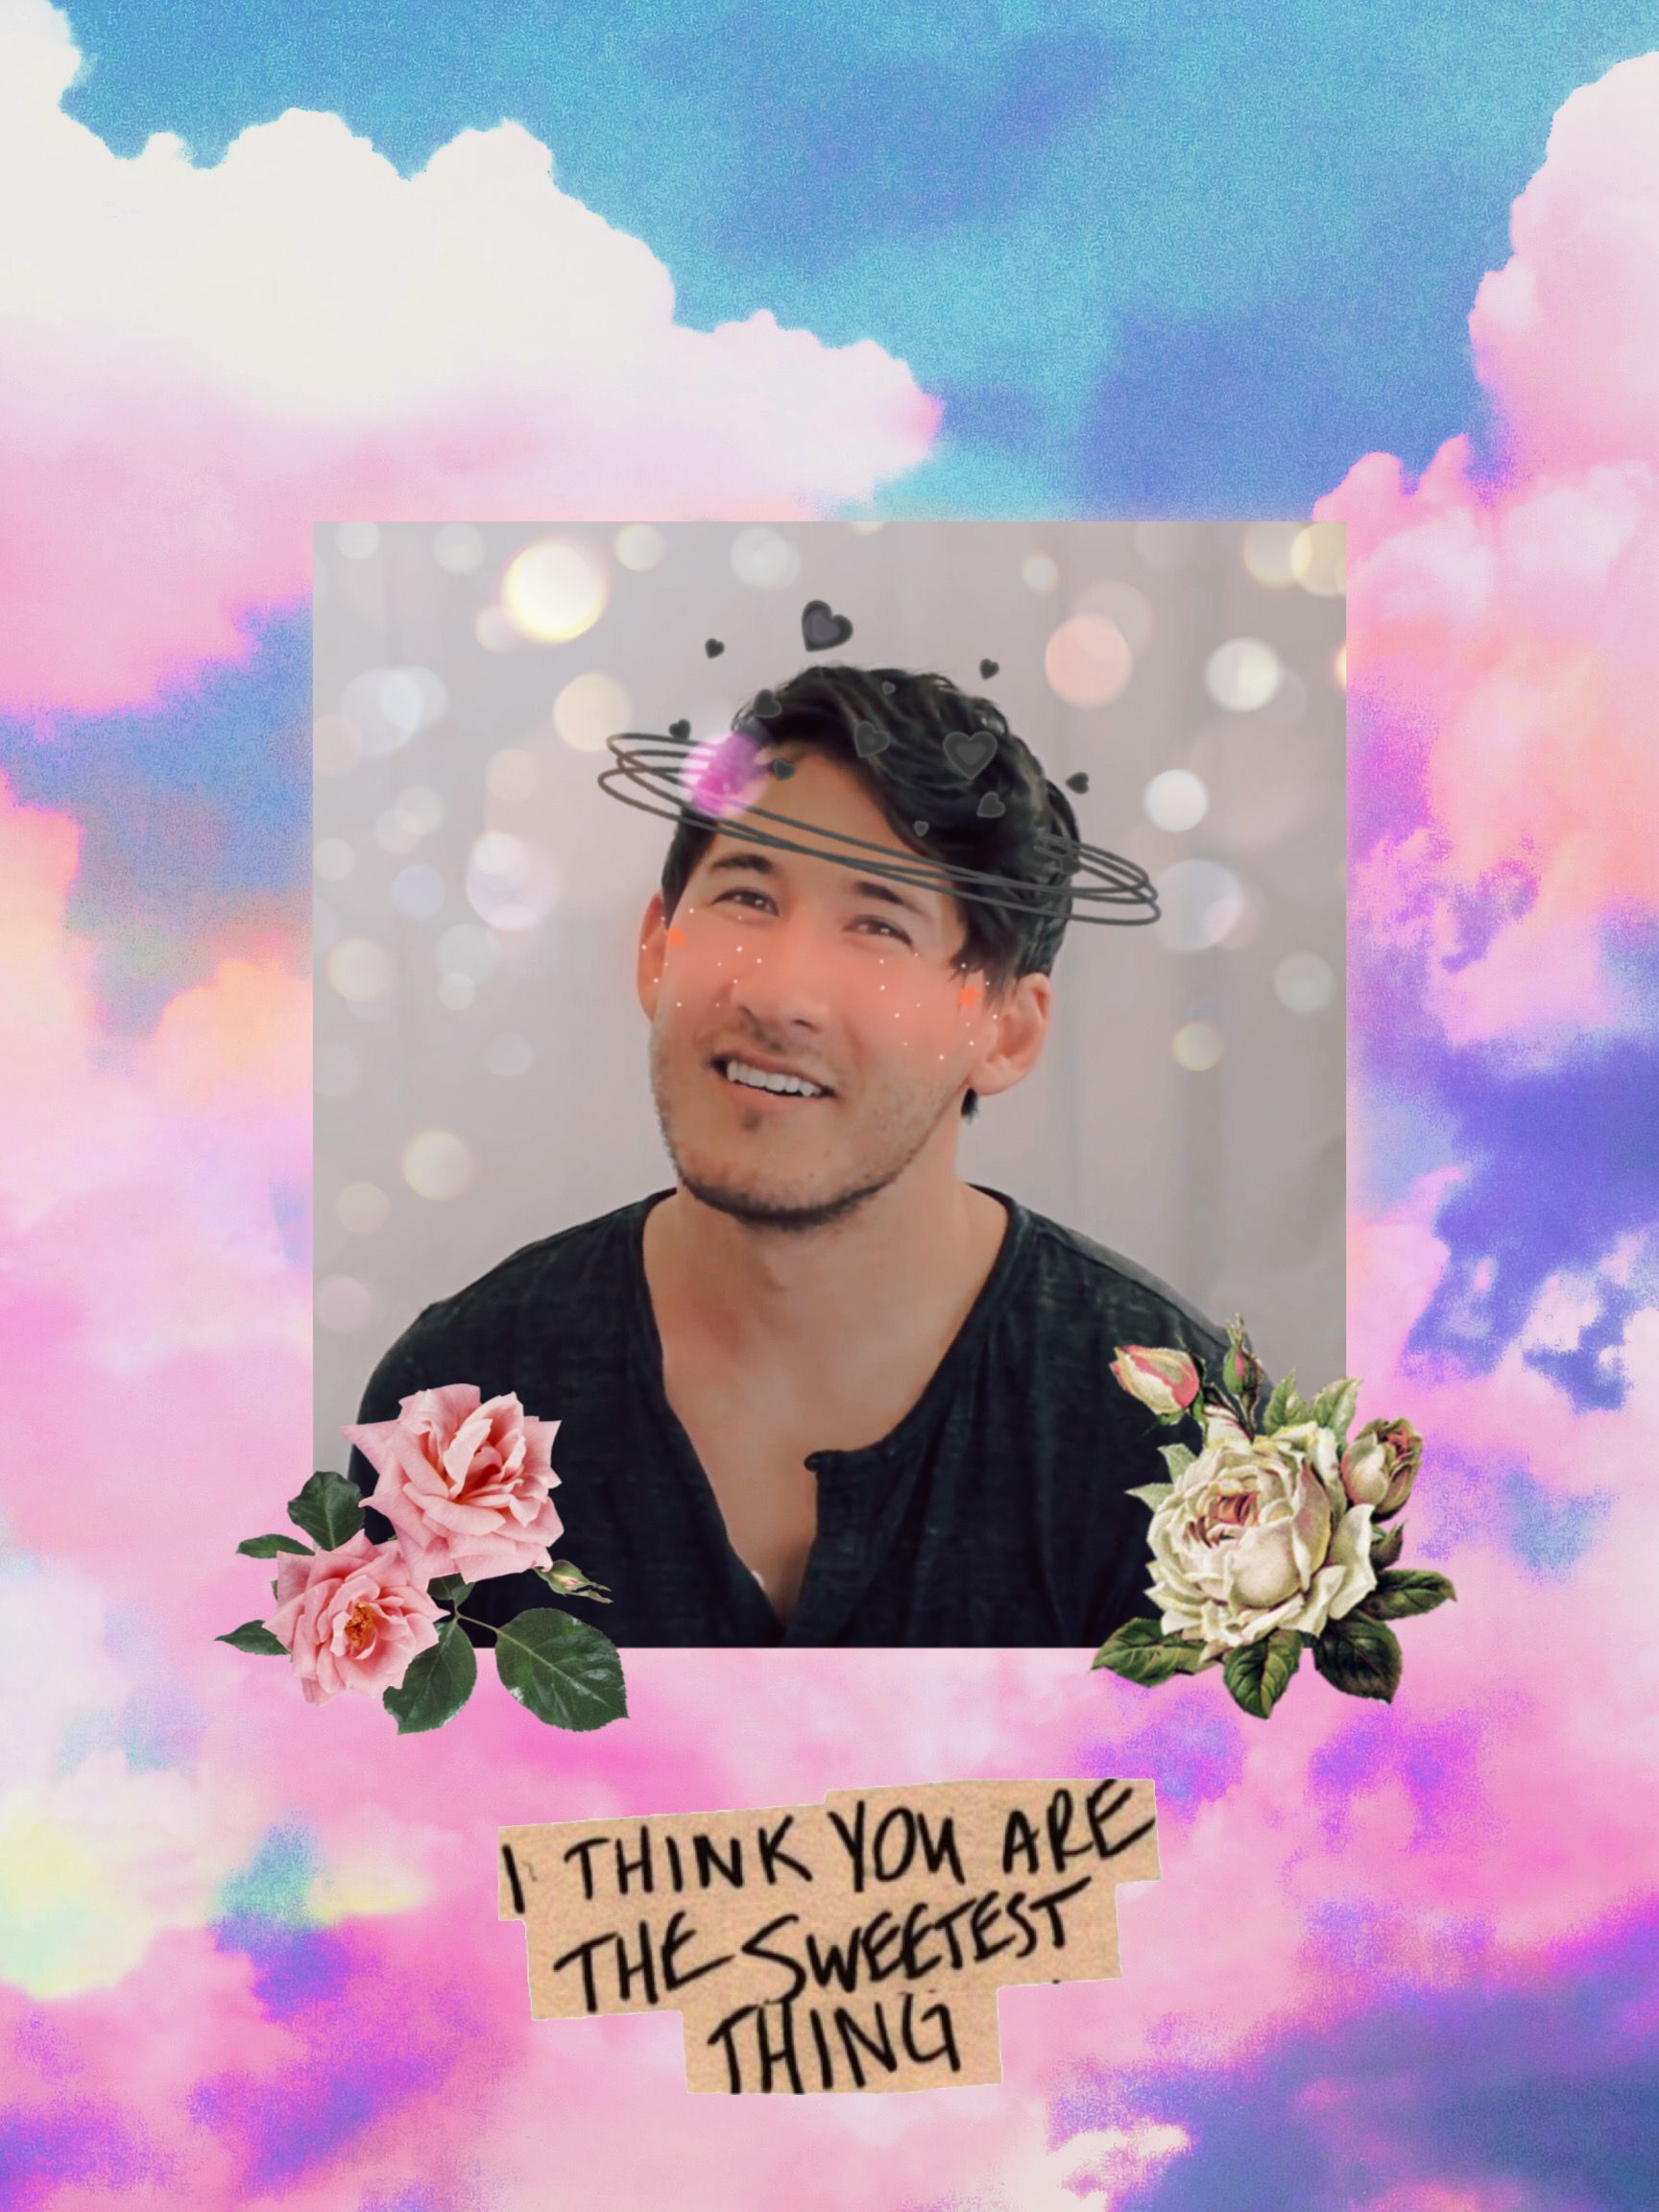 A man is smiling and has flowers on his head - Markiplier